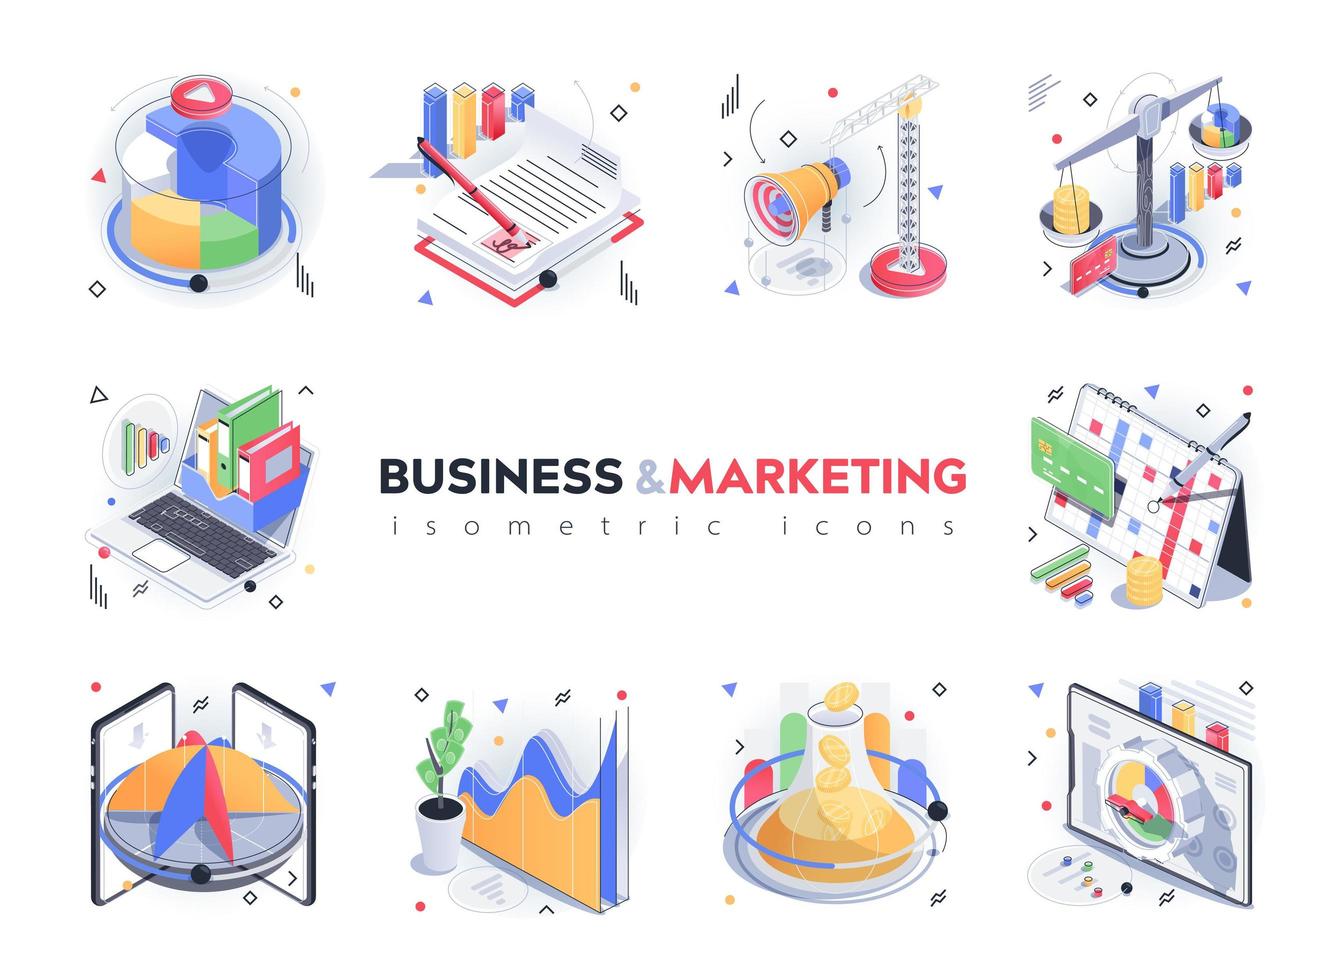 Business and marketing isometric icons set. Data analysis, financial statistics, advertising, promotion strategy, company development 3d isometry isolated pack. Vector illustration isometric elements